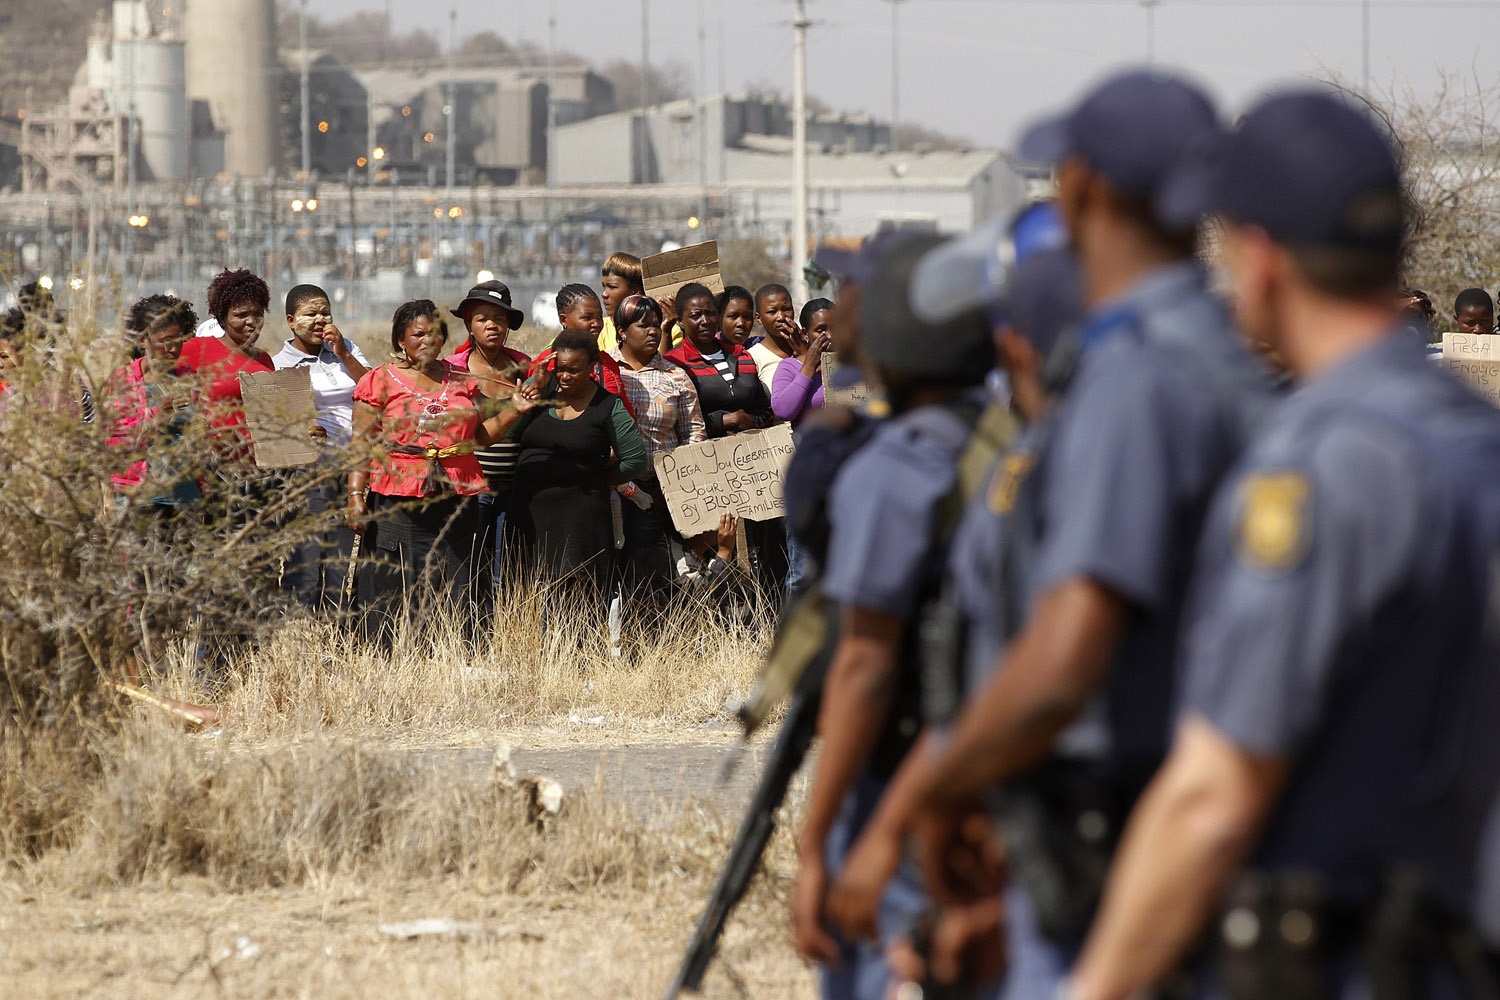 Aug. 17, 2012. Police look on as women carry placards in protest against the killing of miners by the South African police outside a South African mine in Rustenburg, 100 km (62 miles) northwest of Johannesburg.